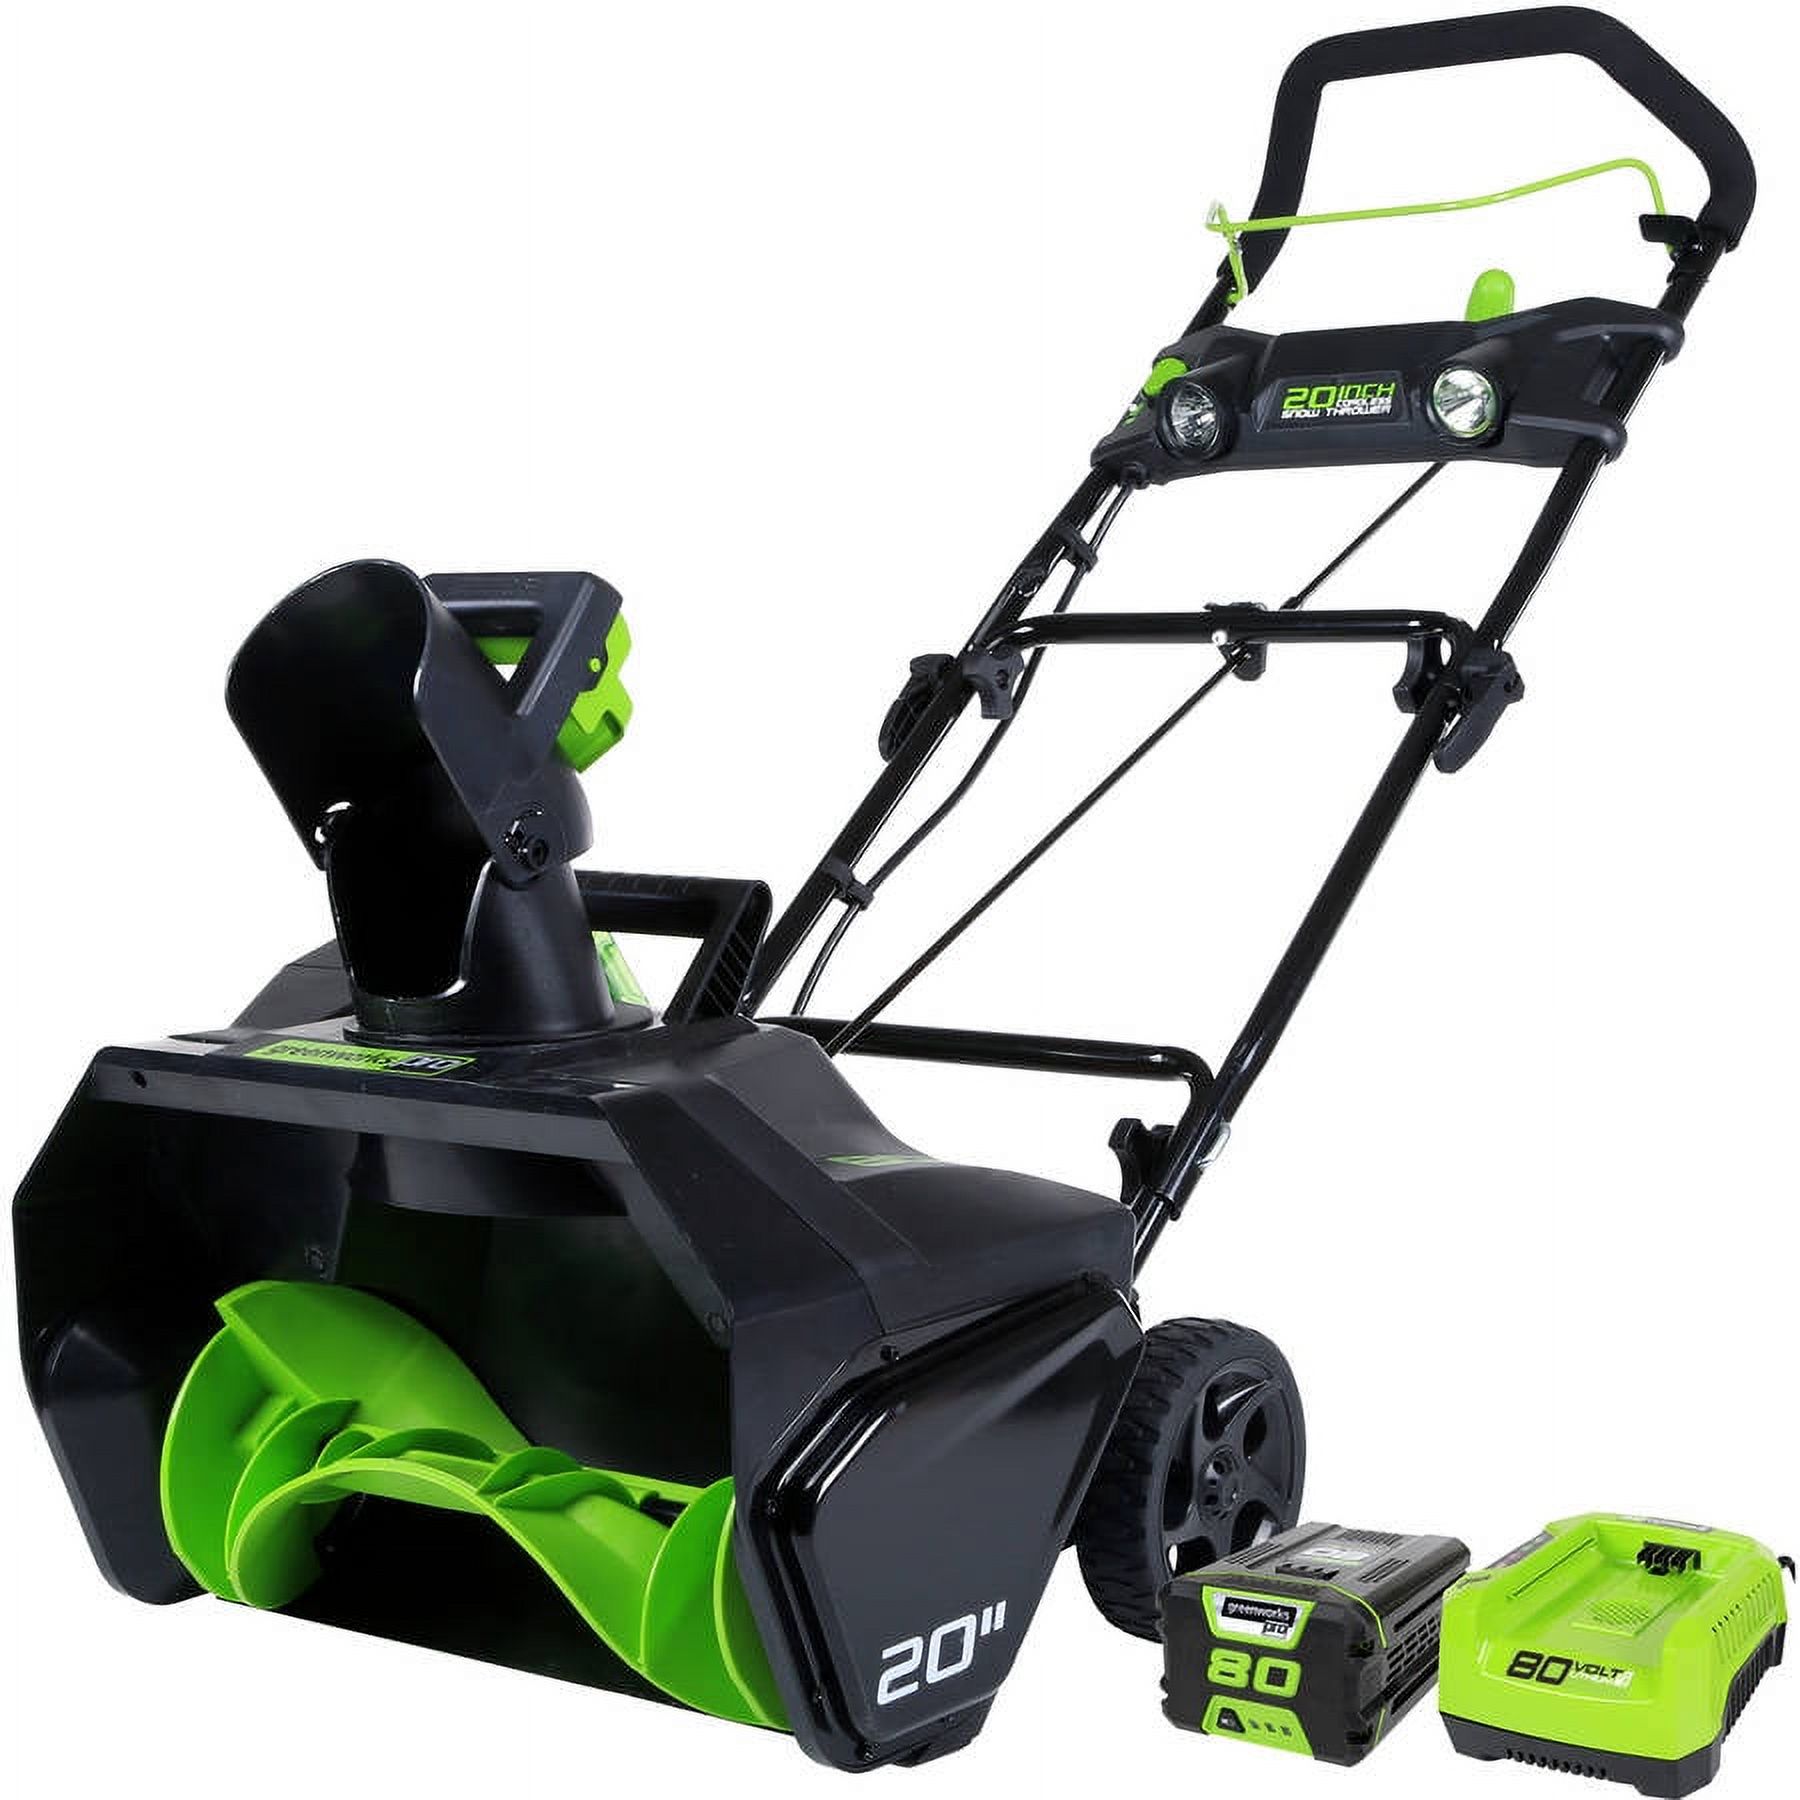 Greenworks Pro 80-Volt 20-inch Brushless Single-Stage Battery Powered Push Snow  Blower with 2.0AH Battery and Charger